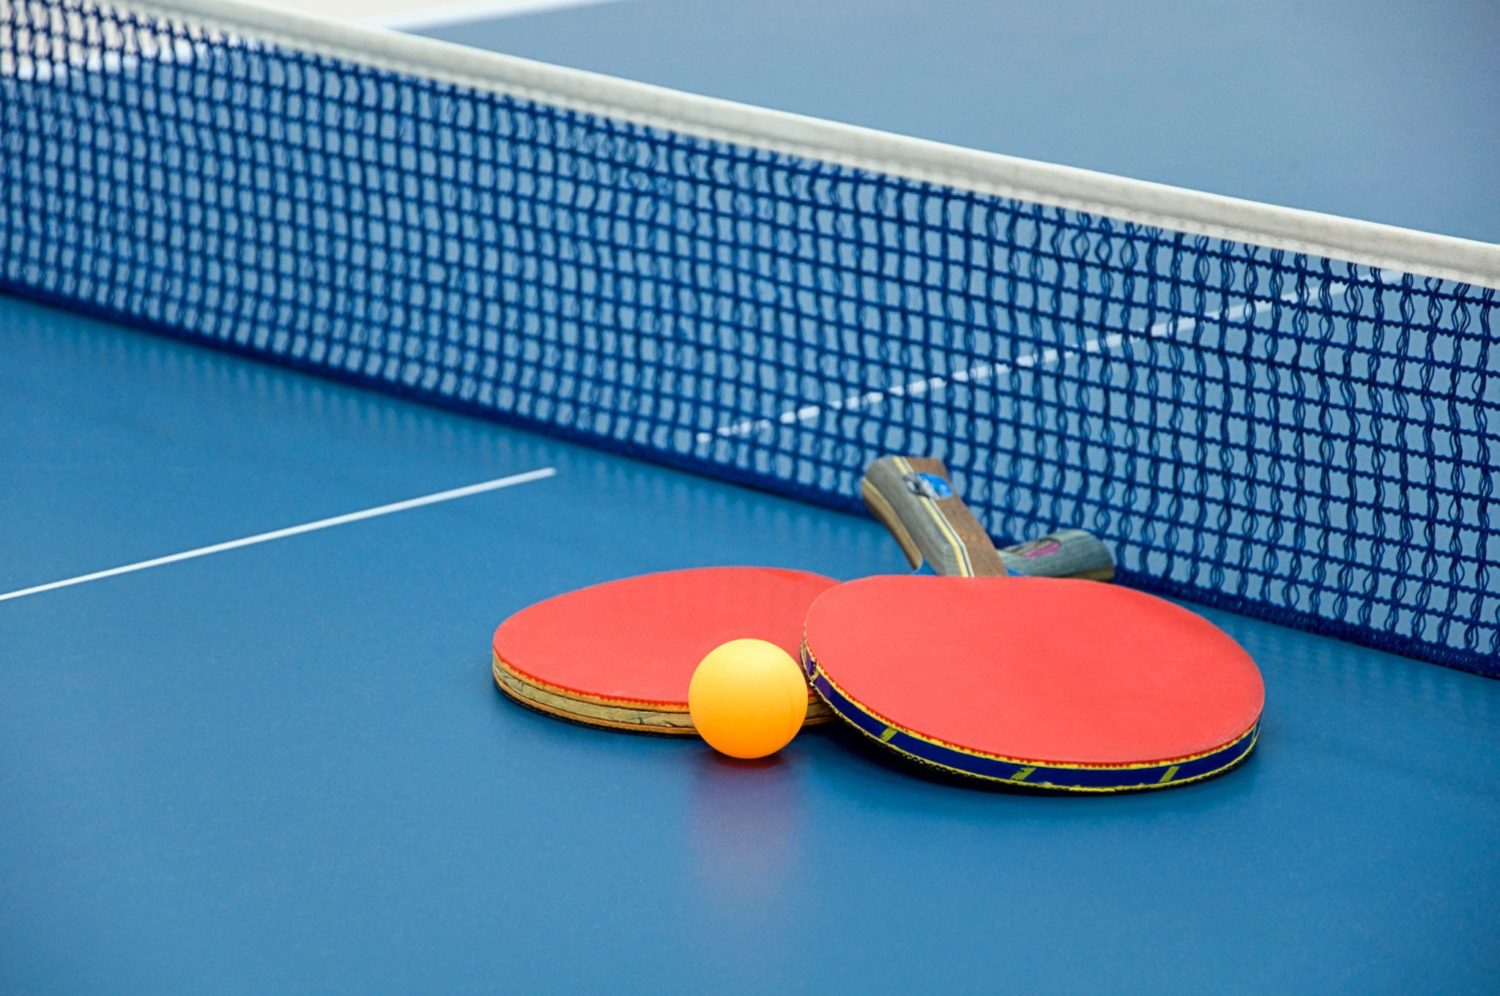 Learn How to Play the Ping-Pong